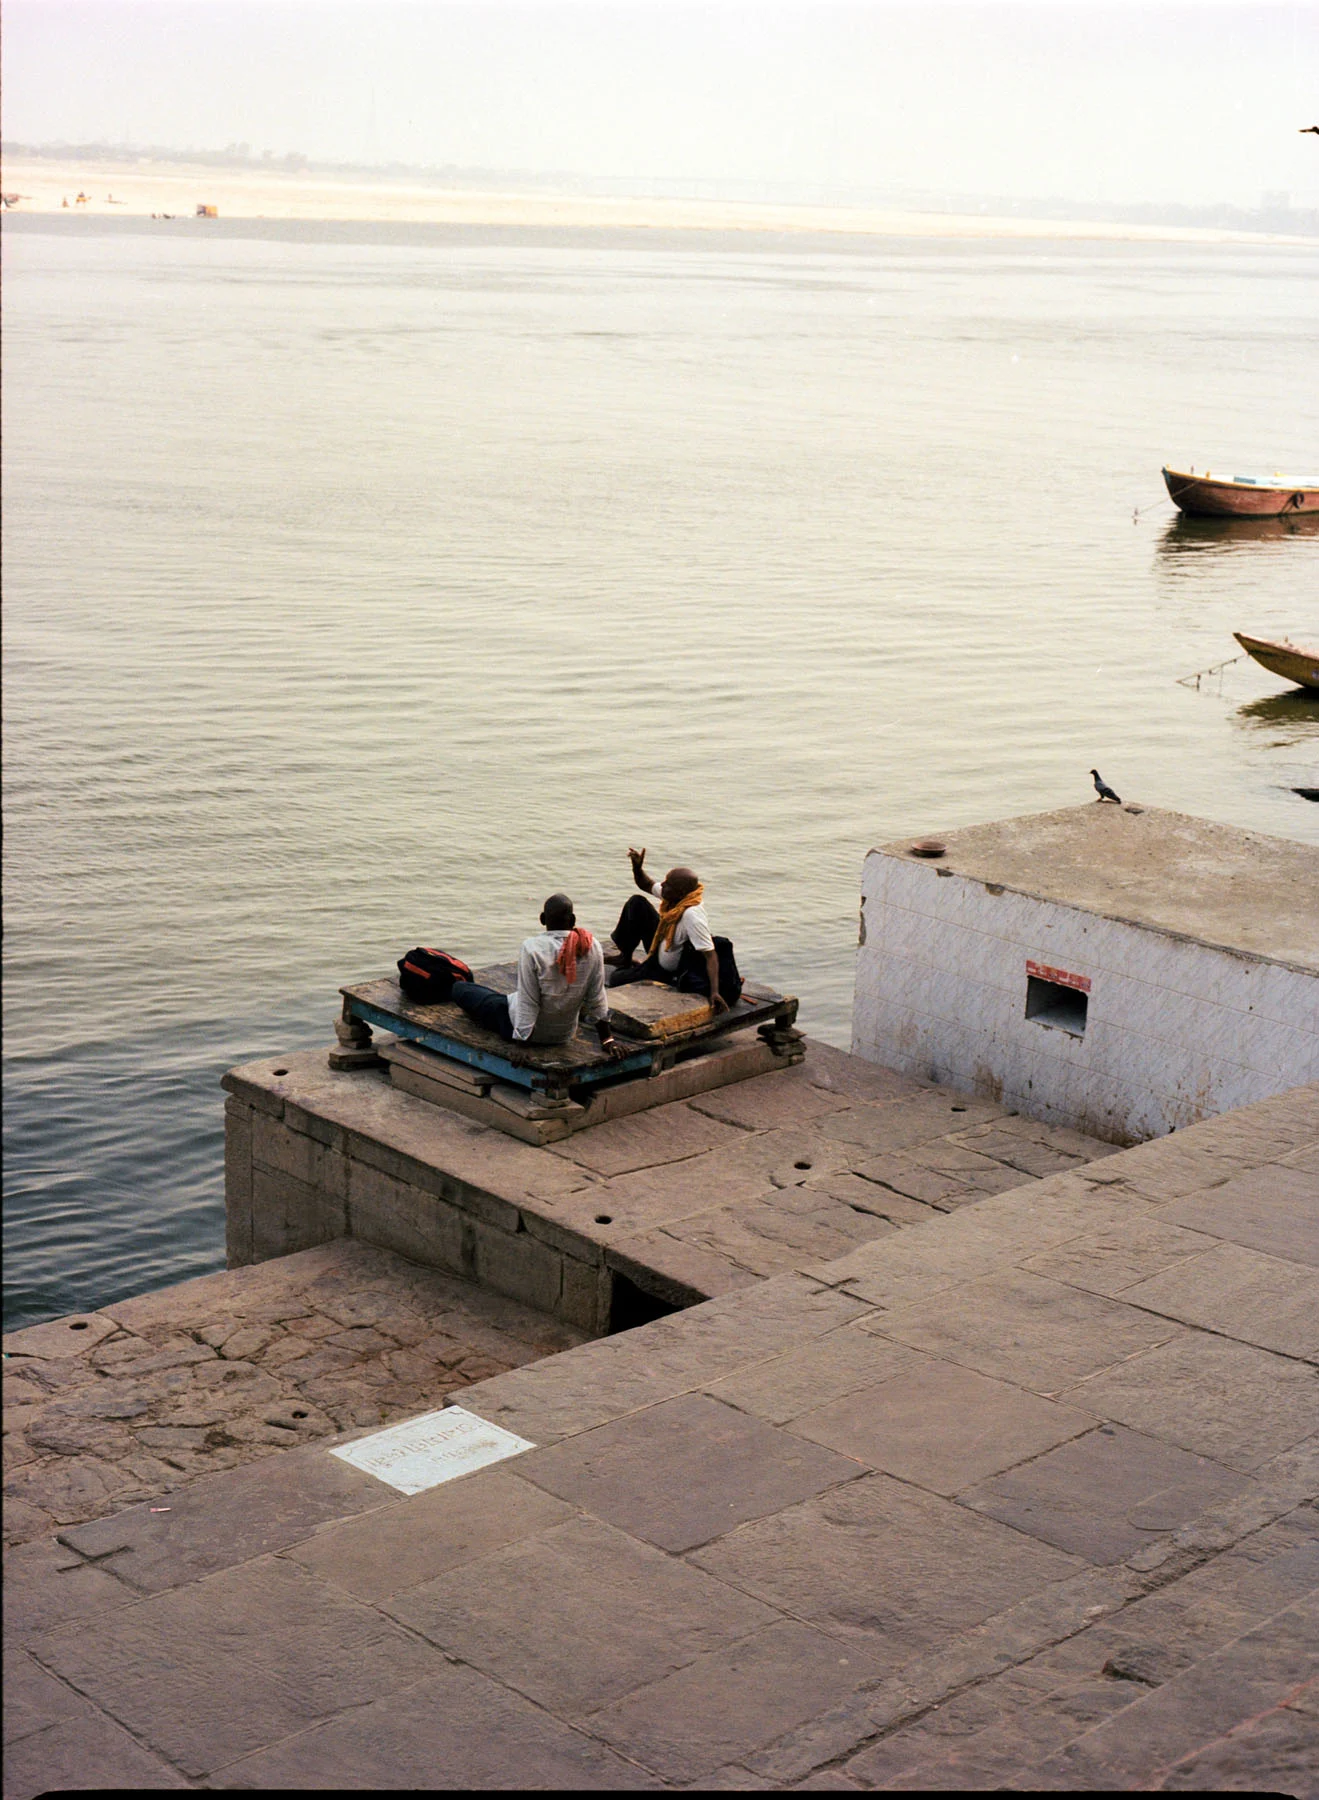 A photograph of two men sitting on the edge of the ghat (the series of steps leading down to a body of water or wharf), by the river ganges. They are chanting Sanskrit verses, with the river stretching out in the background.
